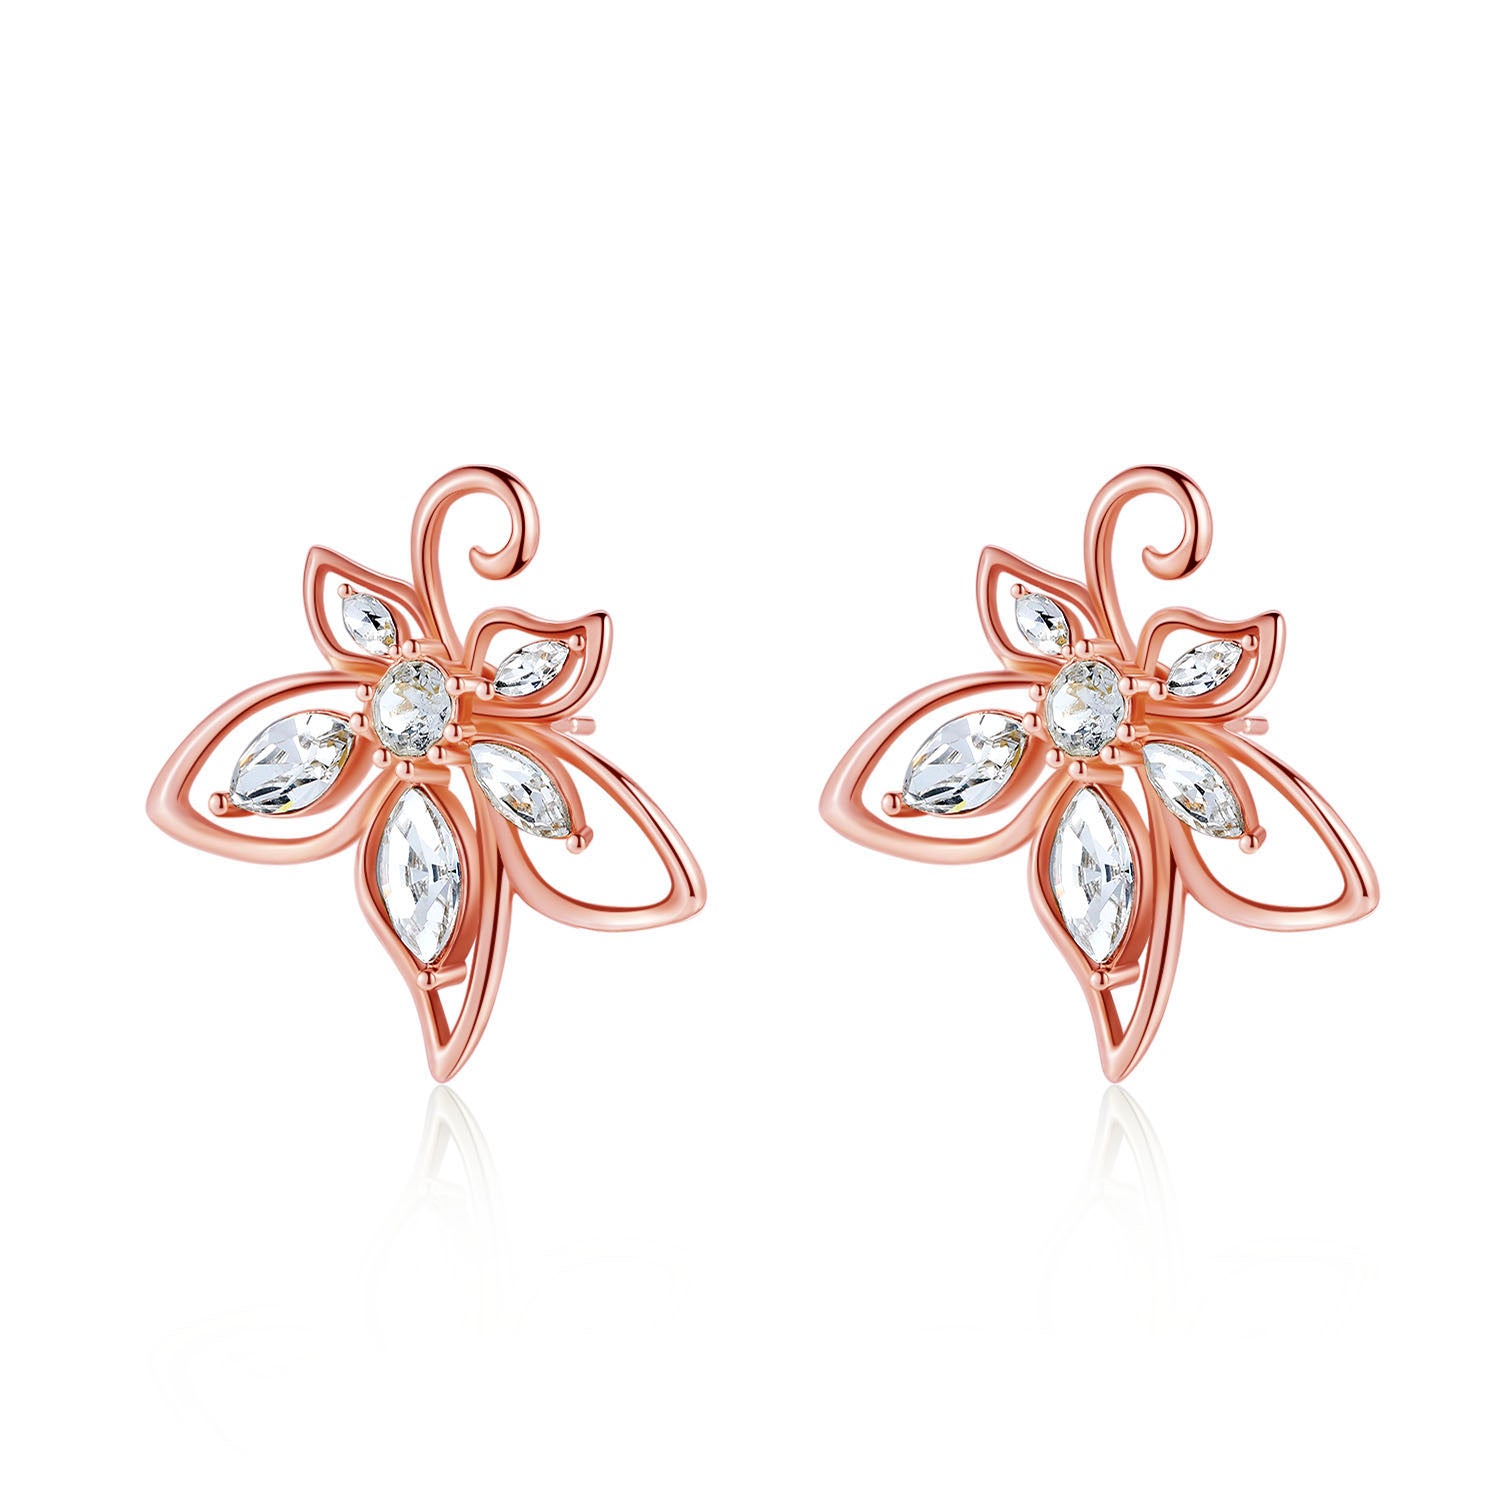 VICACCI 18K Rose Gold Bauhinia Earrings with Swarovski Clear Crystals